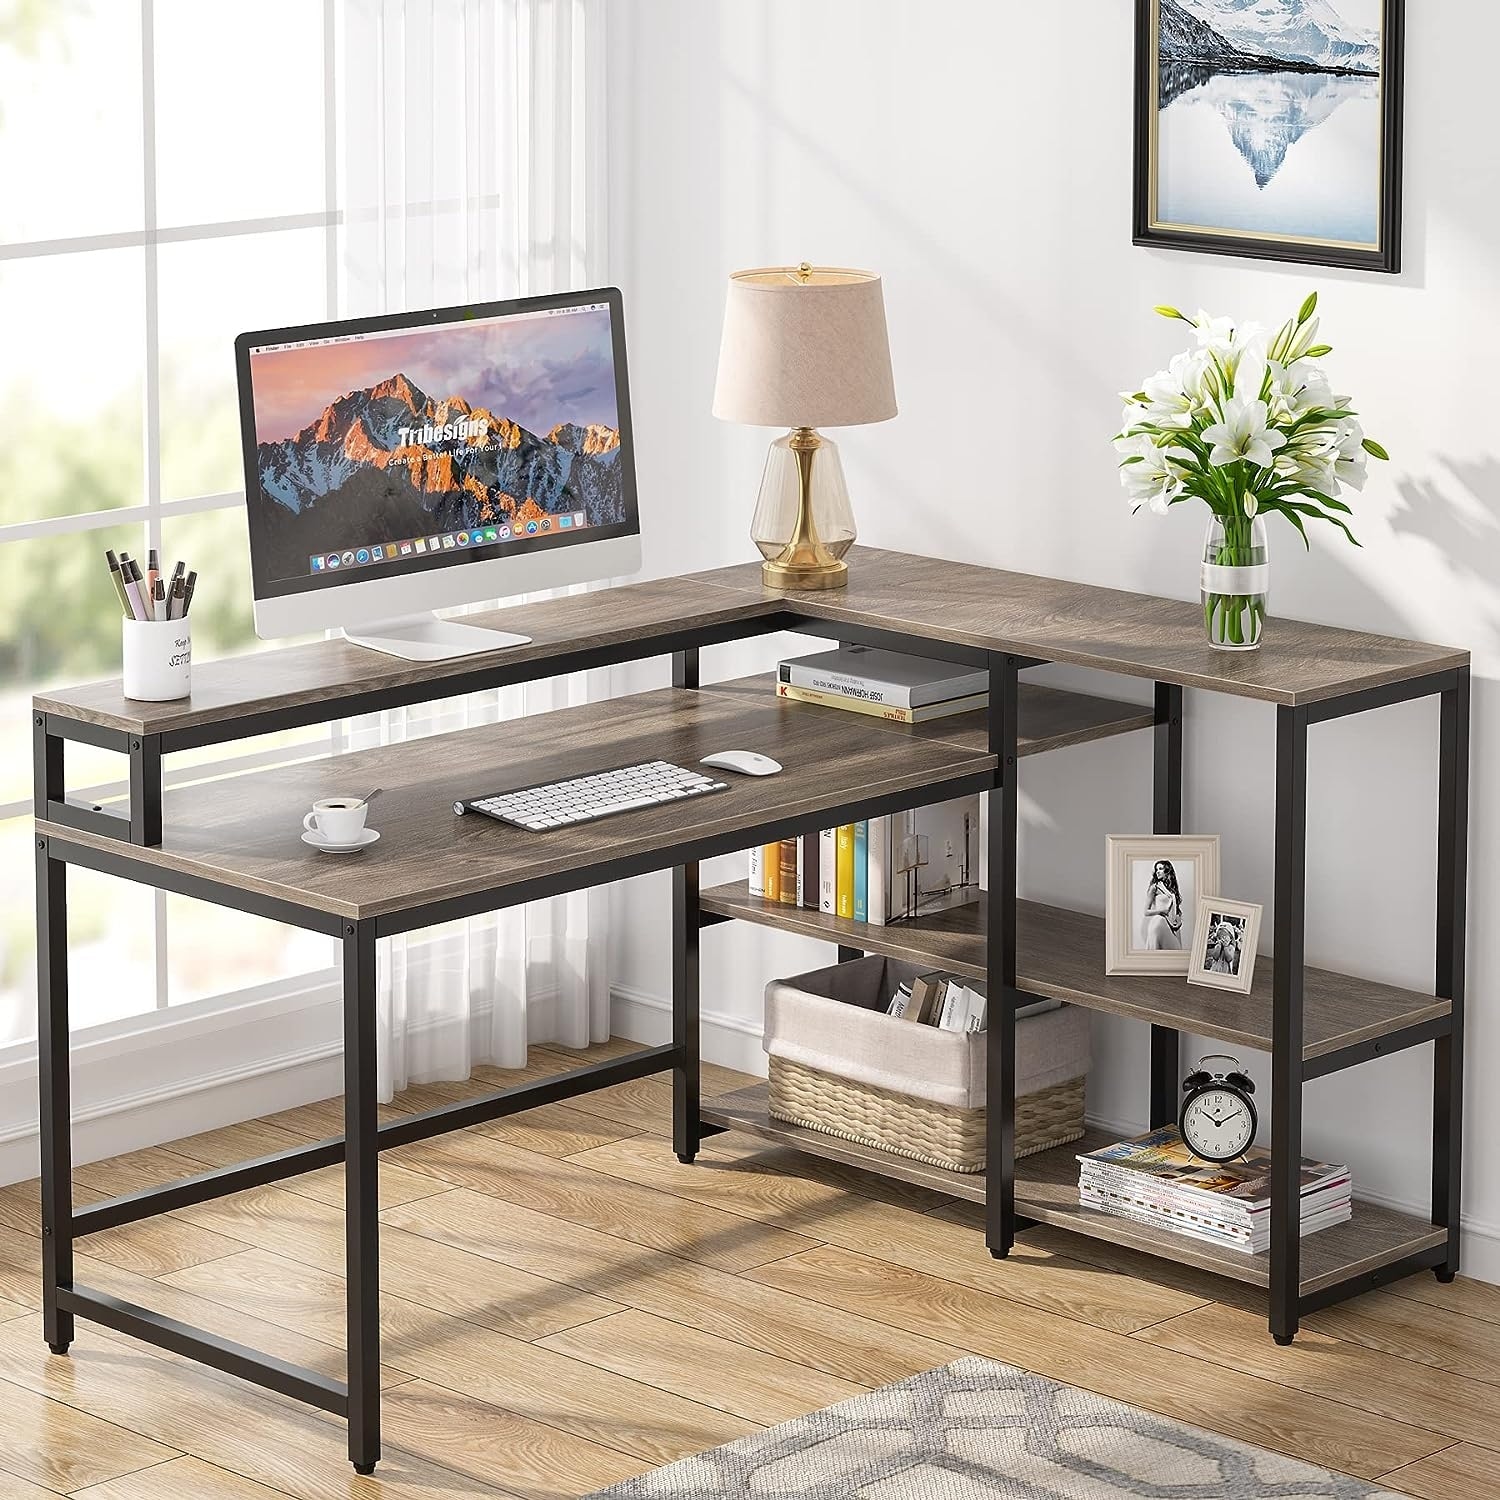 https://ak1.ostkcdn.com/images/products/is/images/direct/2987c26ed01c0b6cd2179644c5b99b42e3a4fafe/55-53-inch-Reversible-L-Shaped-Desk-with-Storage-Shelf-and-Monitor-Stand%2CCorner-Desk.jpg